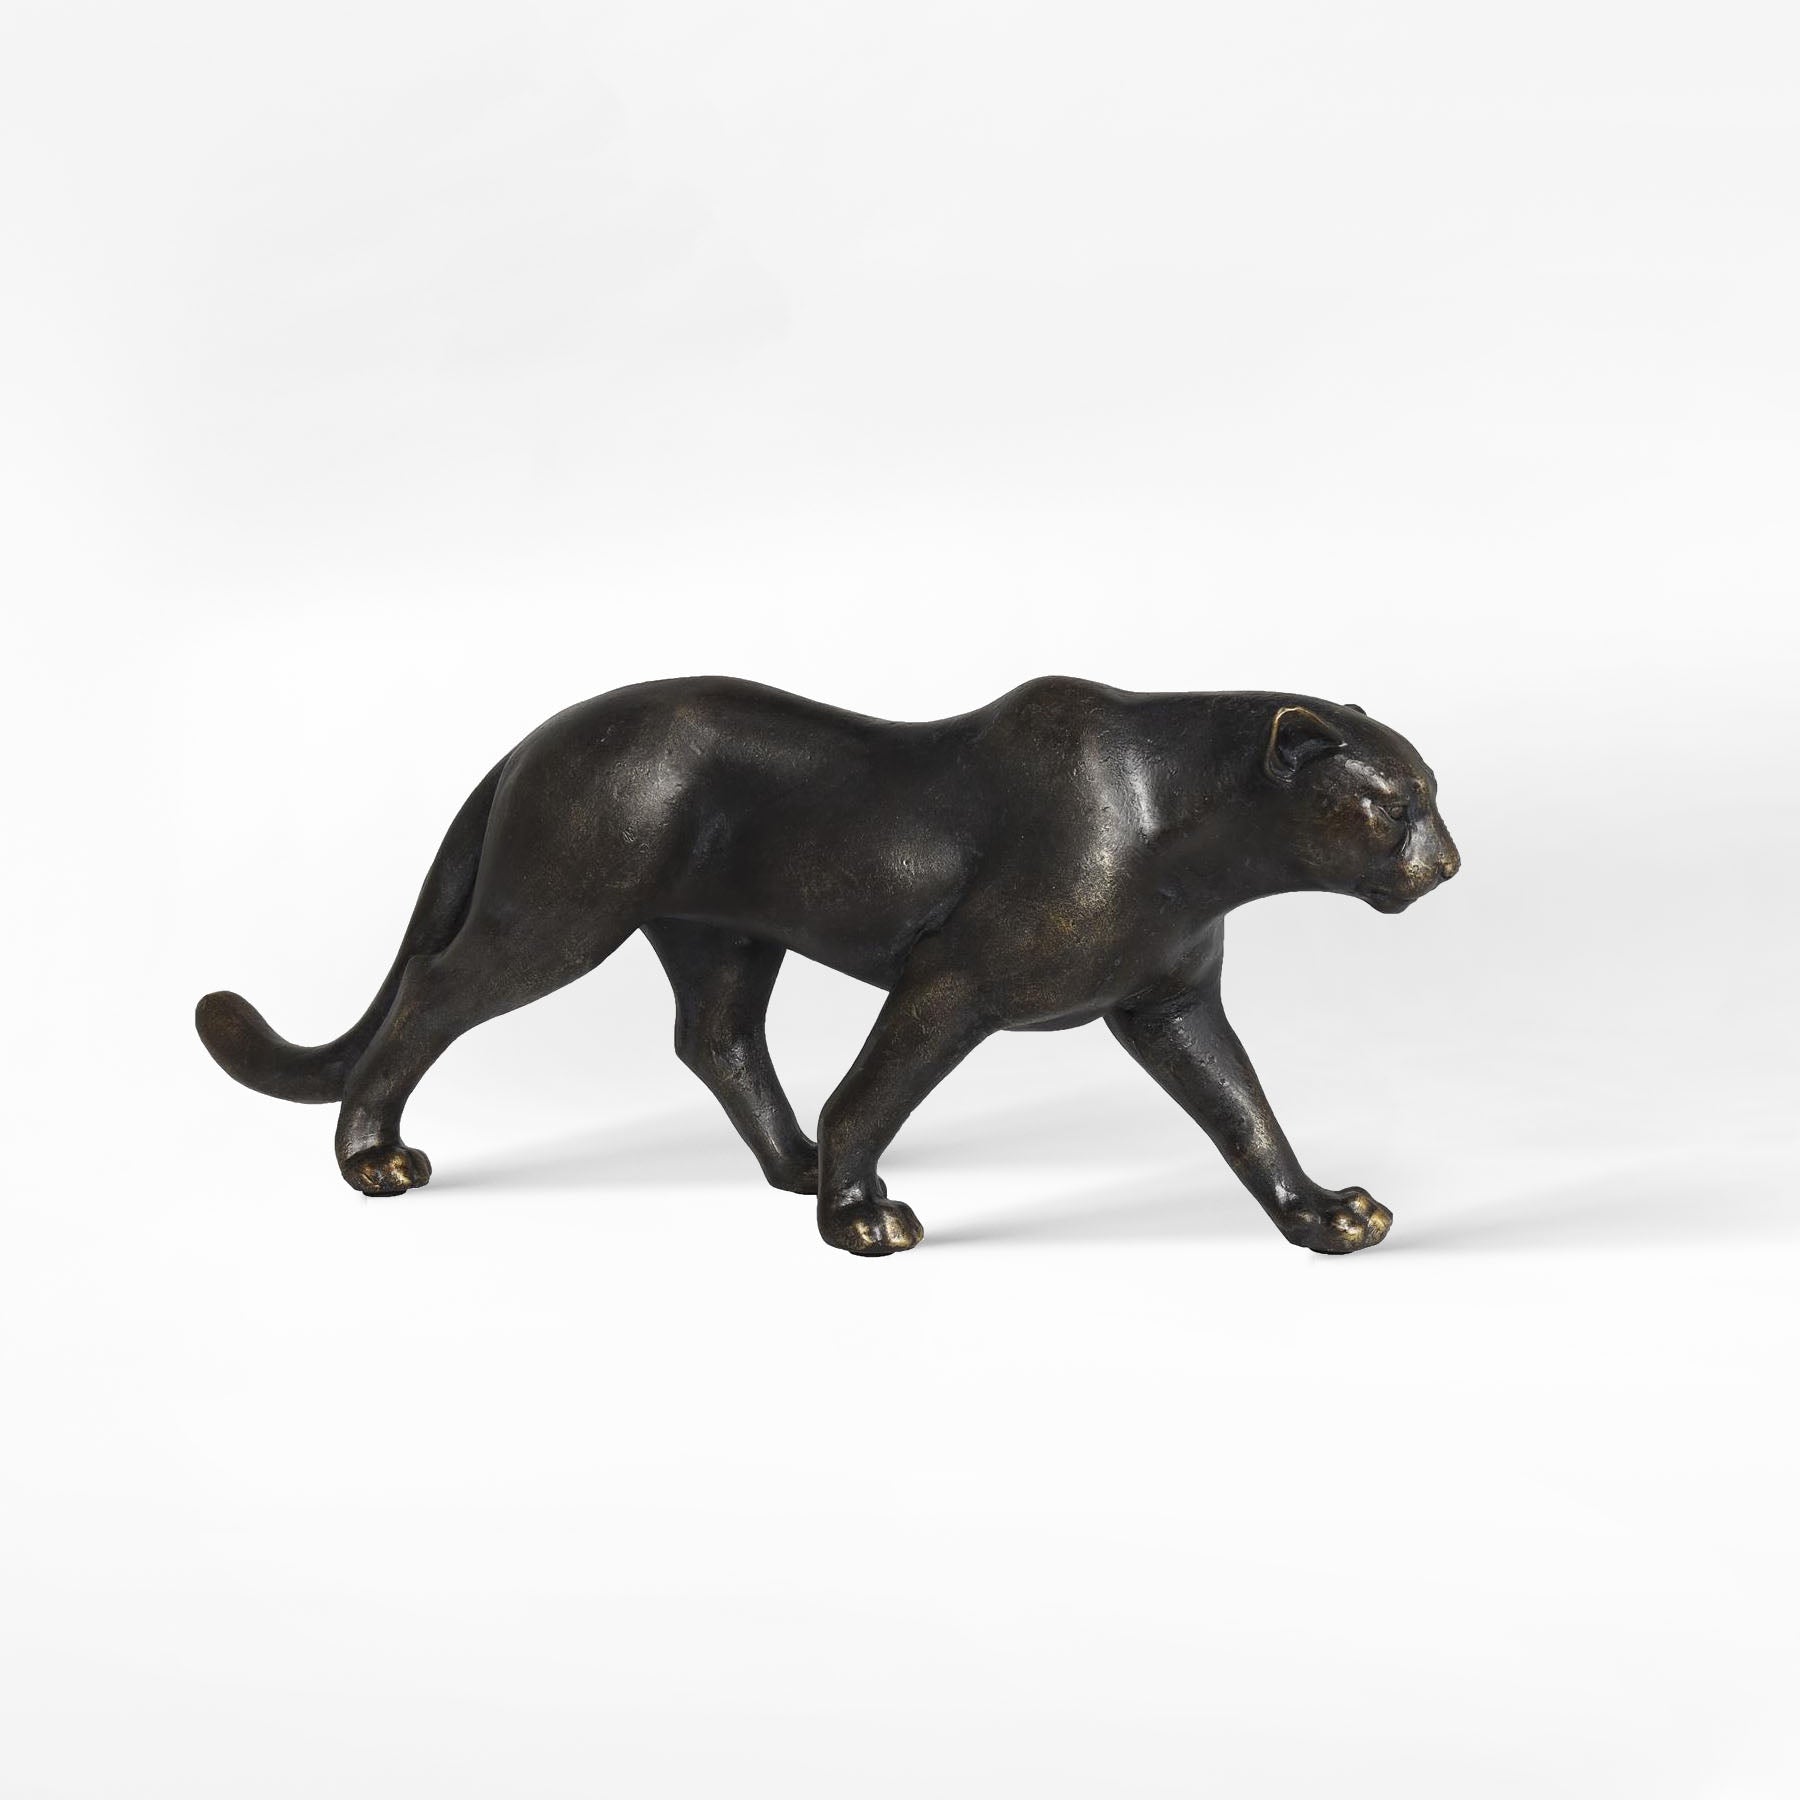 Black Polystone Leopard Sculpture With Gold Accents